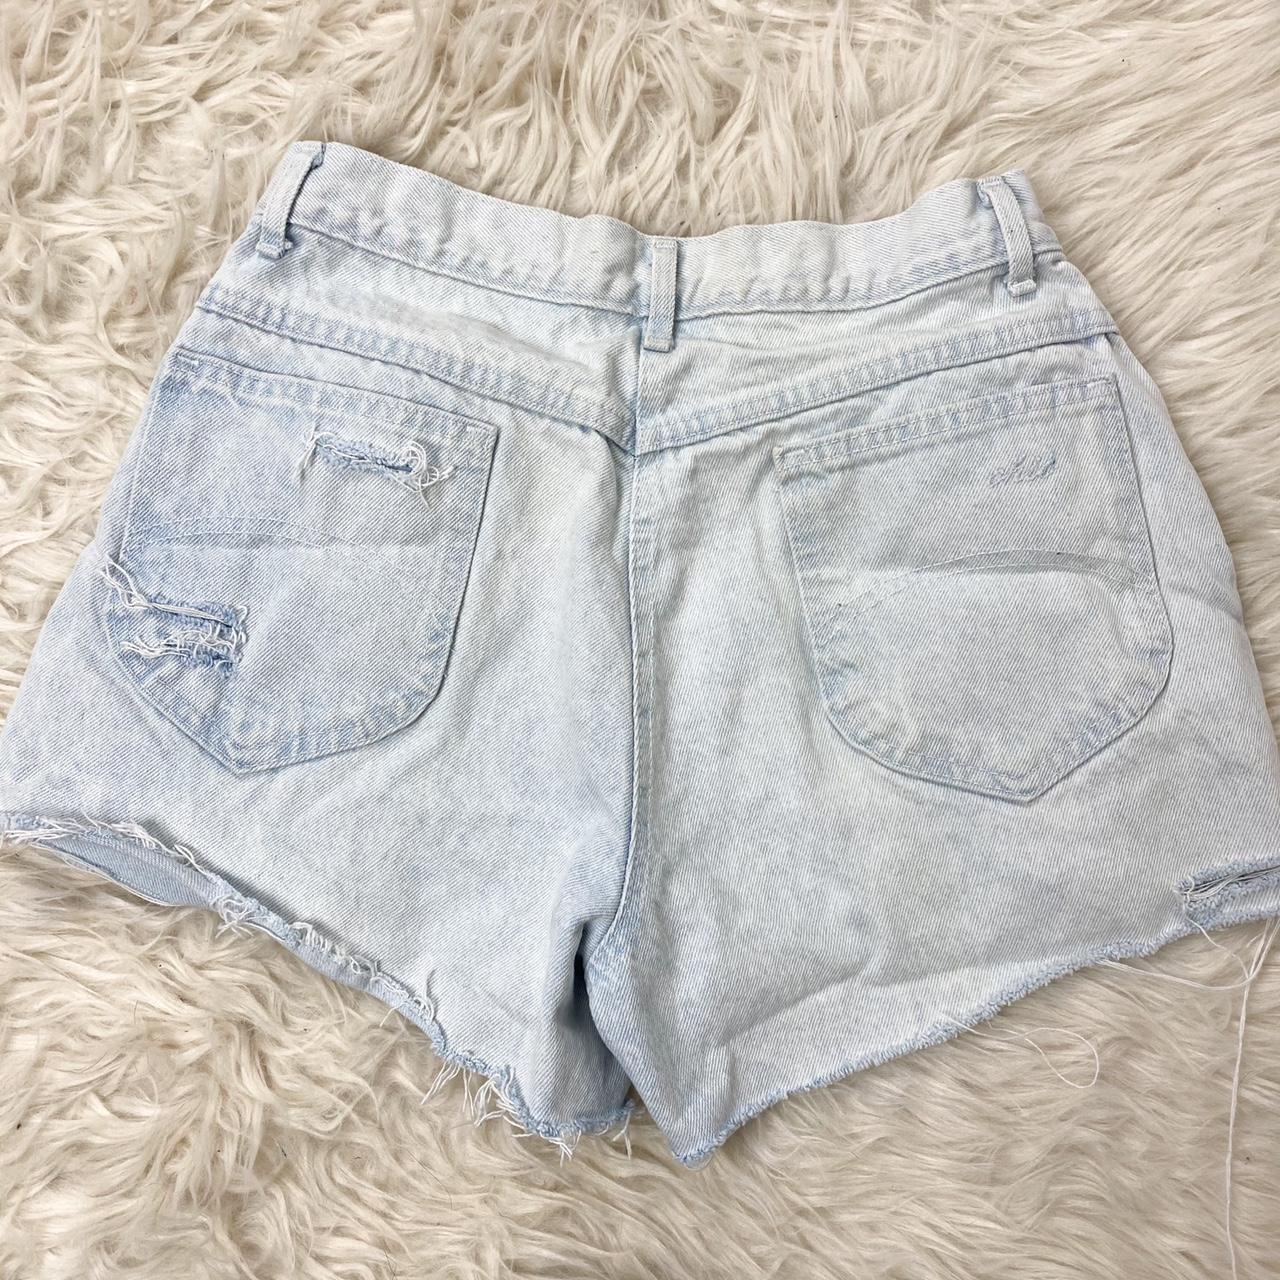 Chic Women's Blue and White Shorts (4)